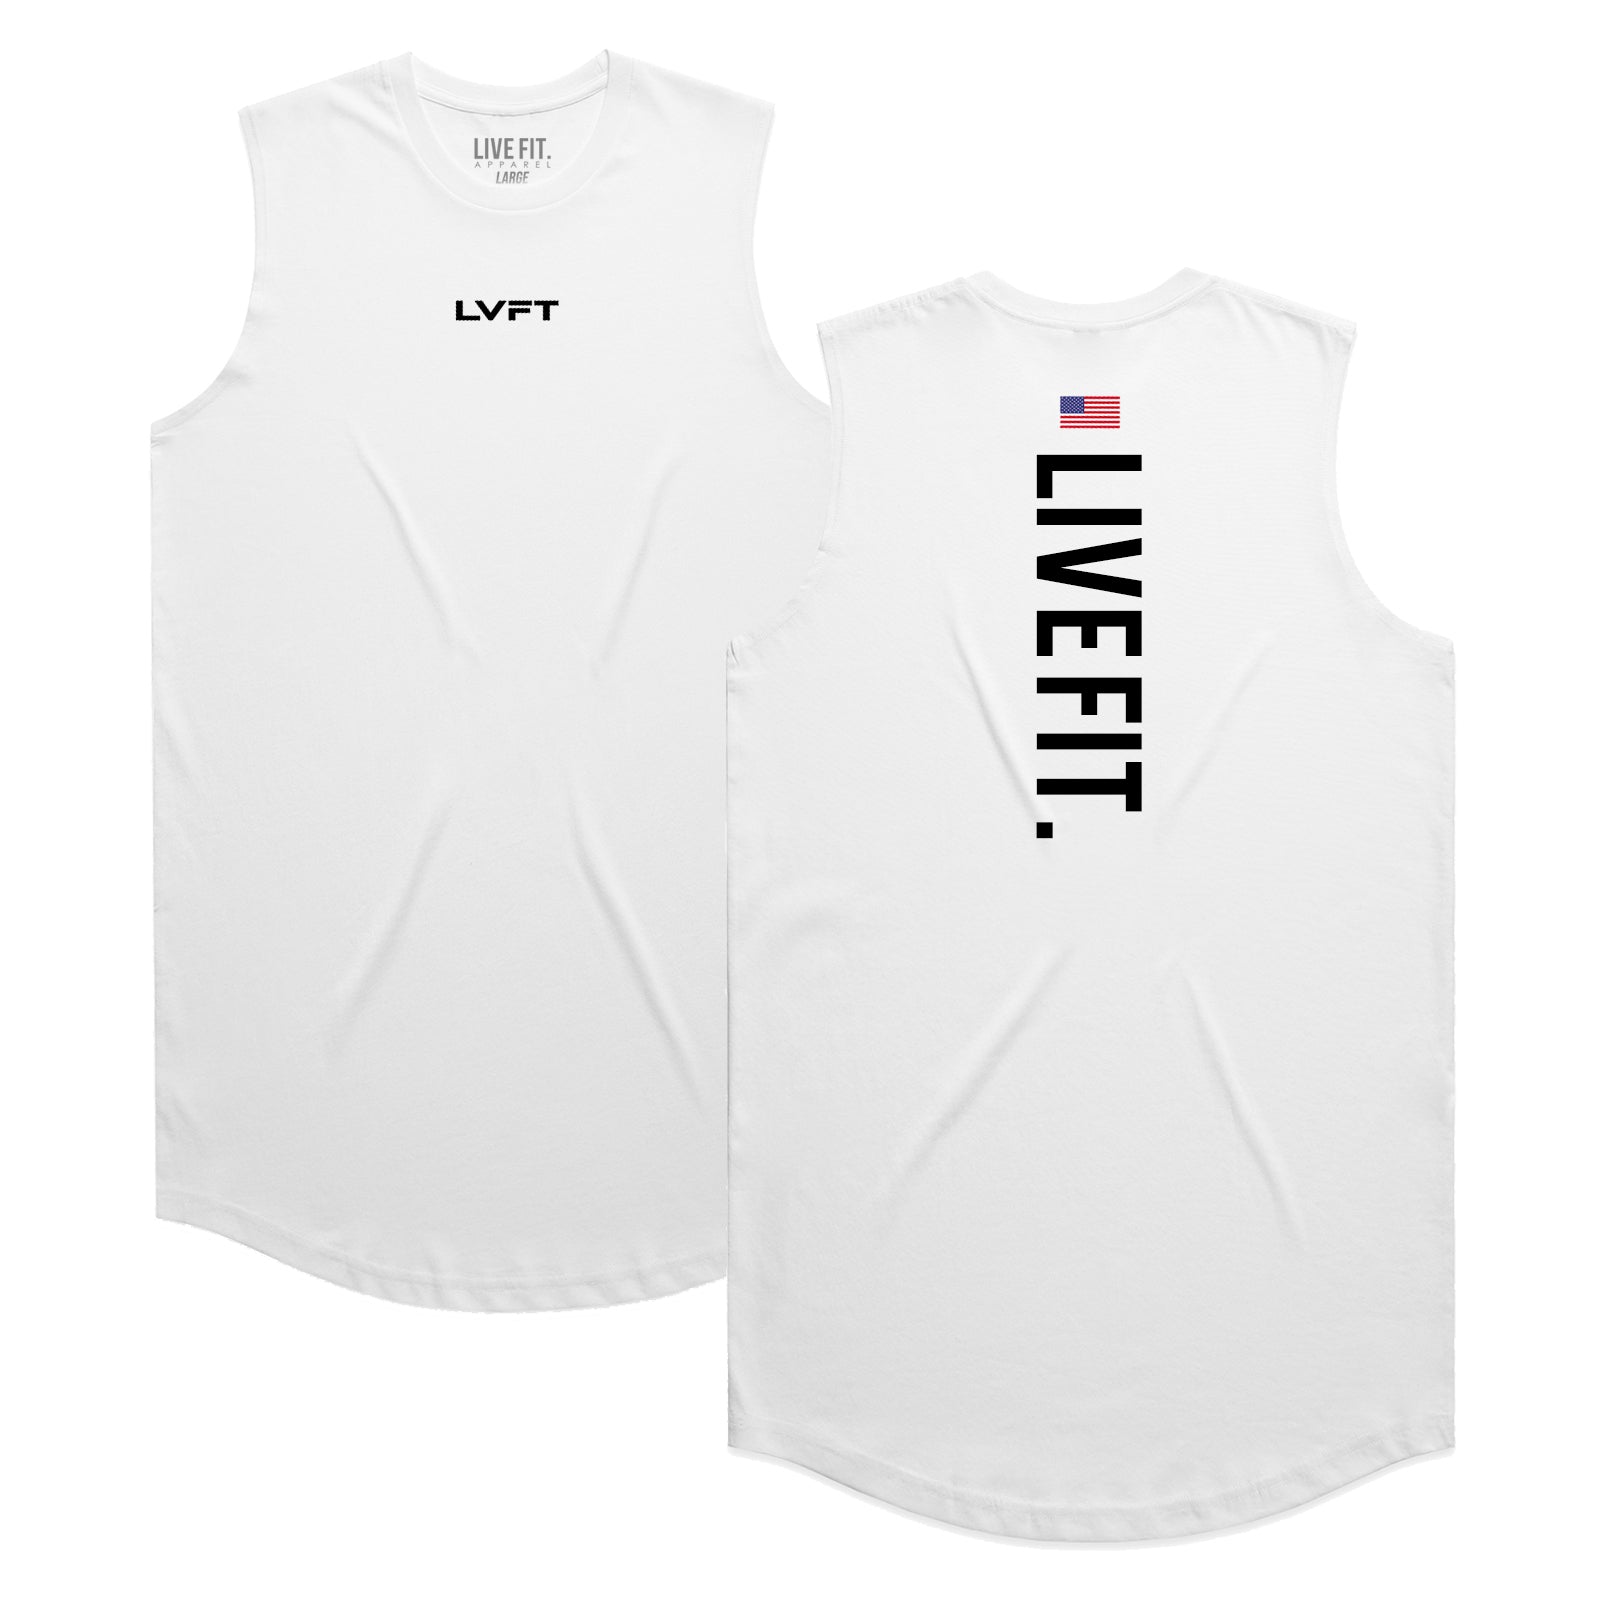 TEAM LIVE FIT USA Scallop Muscle Tank - White - Live Fit. Apparel